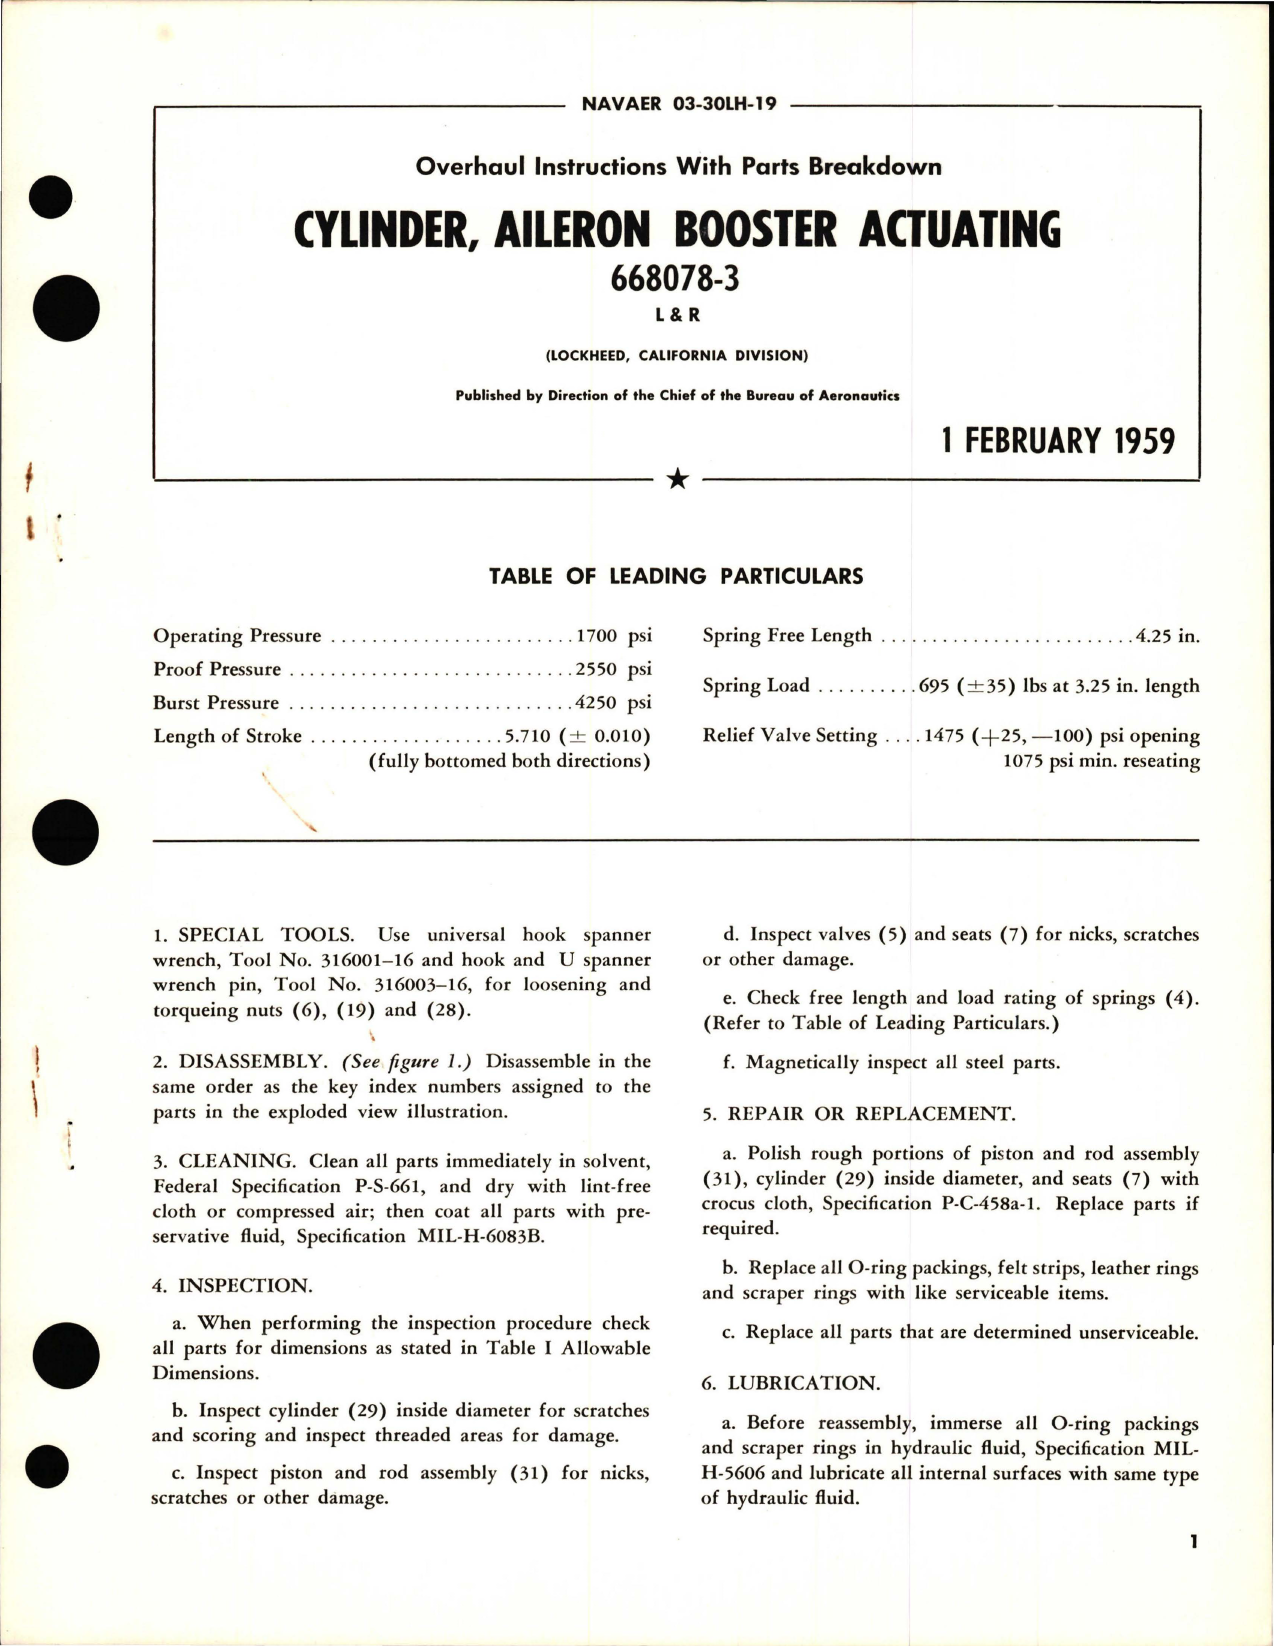 Sample page 1 from AirCorps Library document: Overhaul Instructions with Parts Breakdown for Aileron Booster Actuating Cylinder - 668078-3